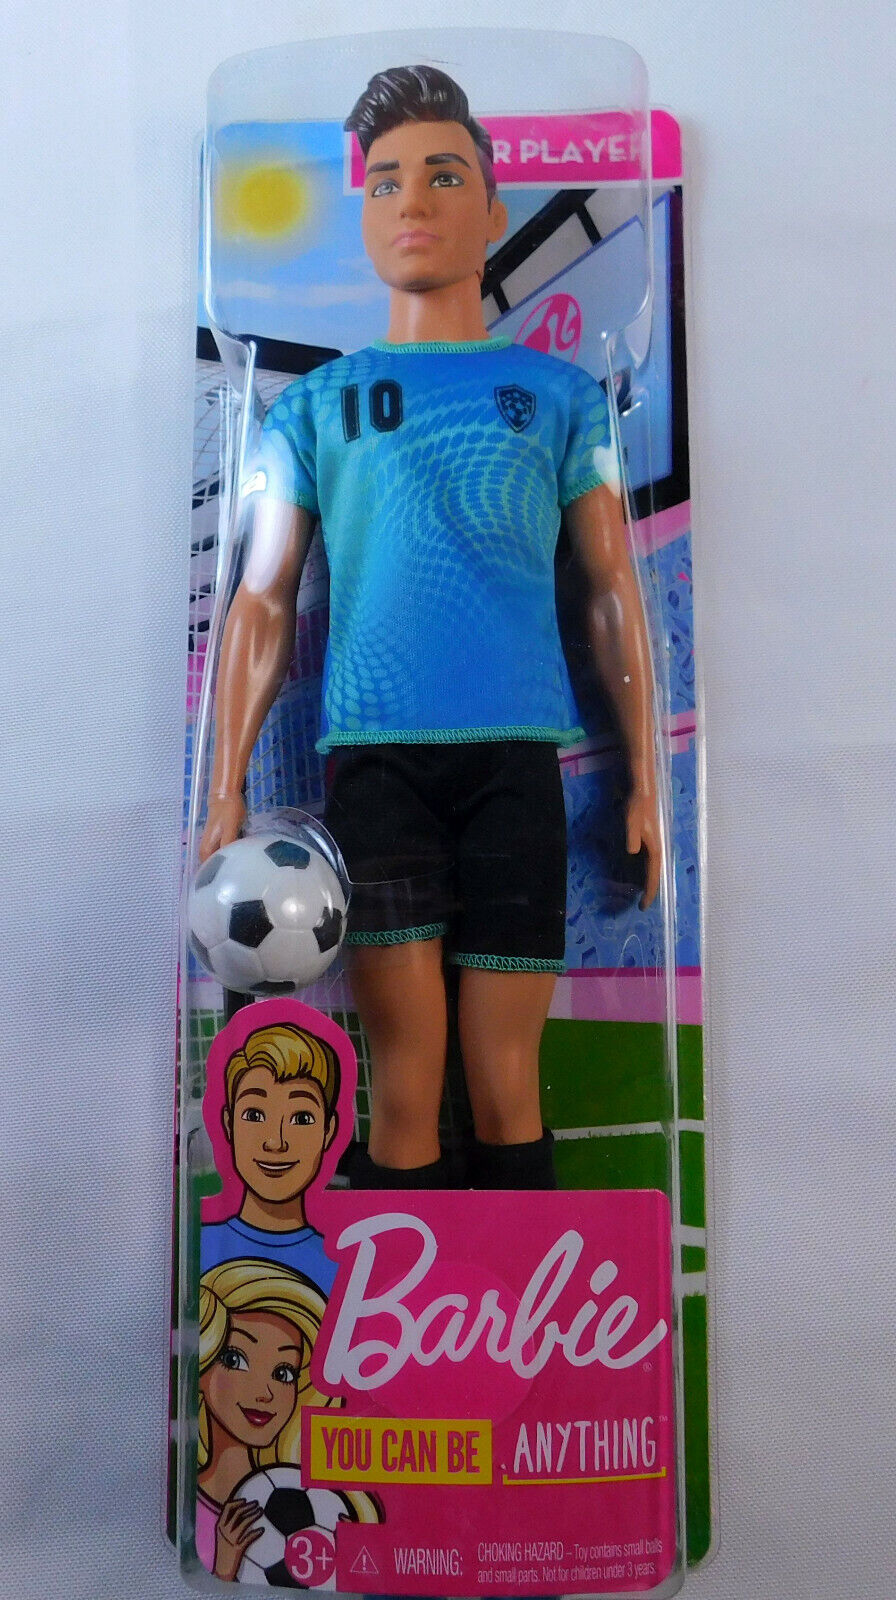 Barbie Mattel Soccer Player Ken Doll You Can Be Anything Series New in Box